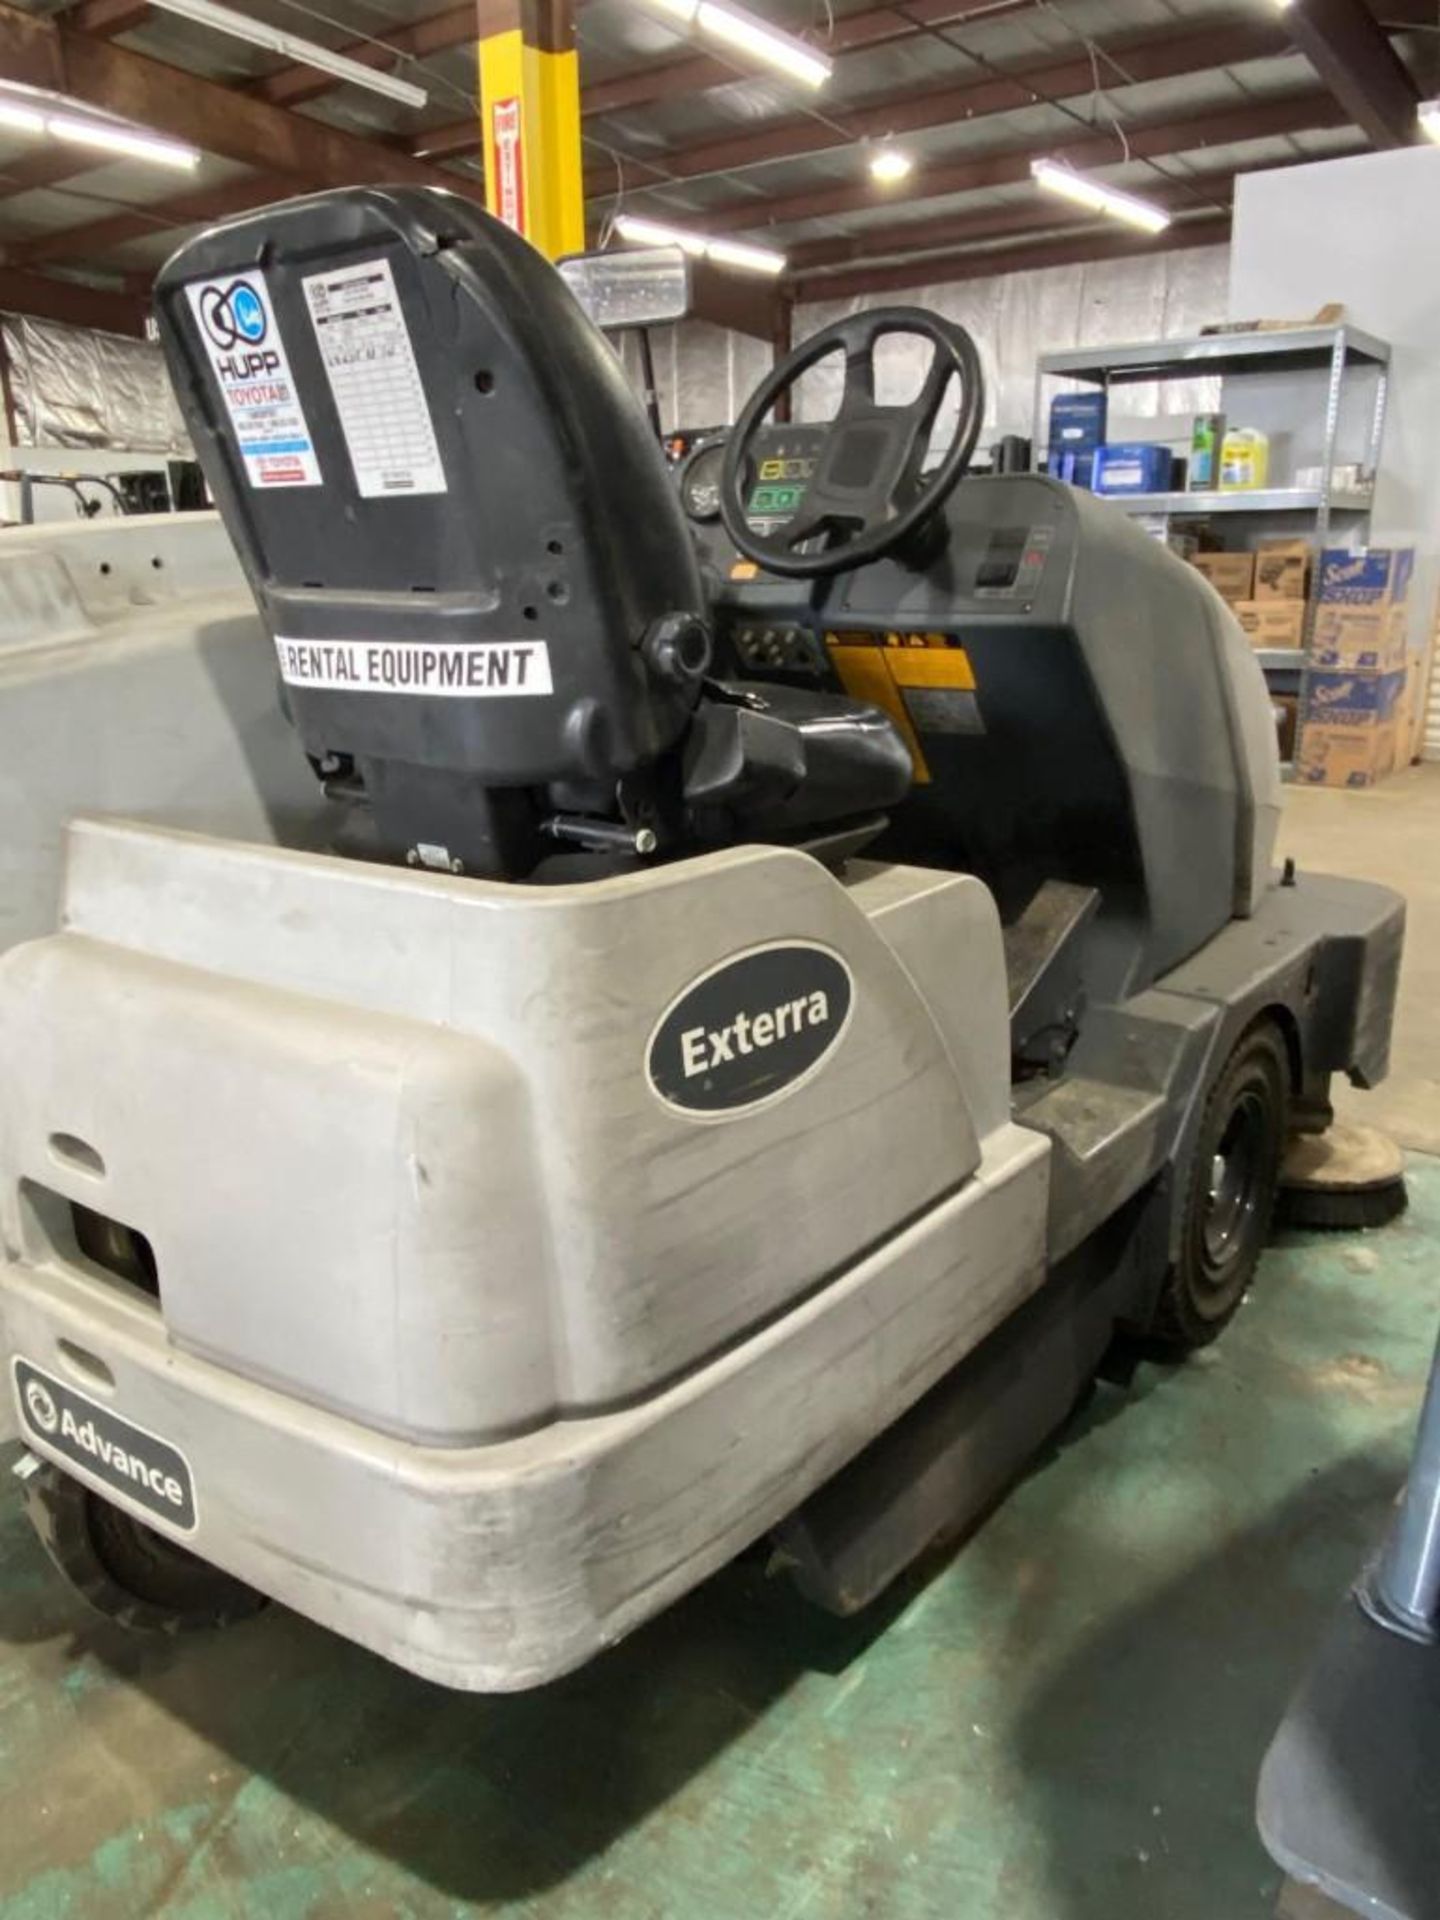 2011 Advance 6330 Exterra Floor Sweeper. Serial # 100004380. Located in Mt. Pleasant, IA. - Image 4 of 12